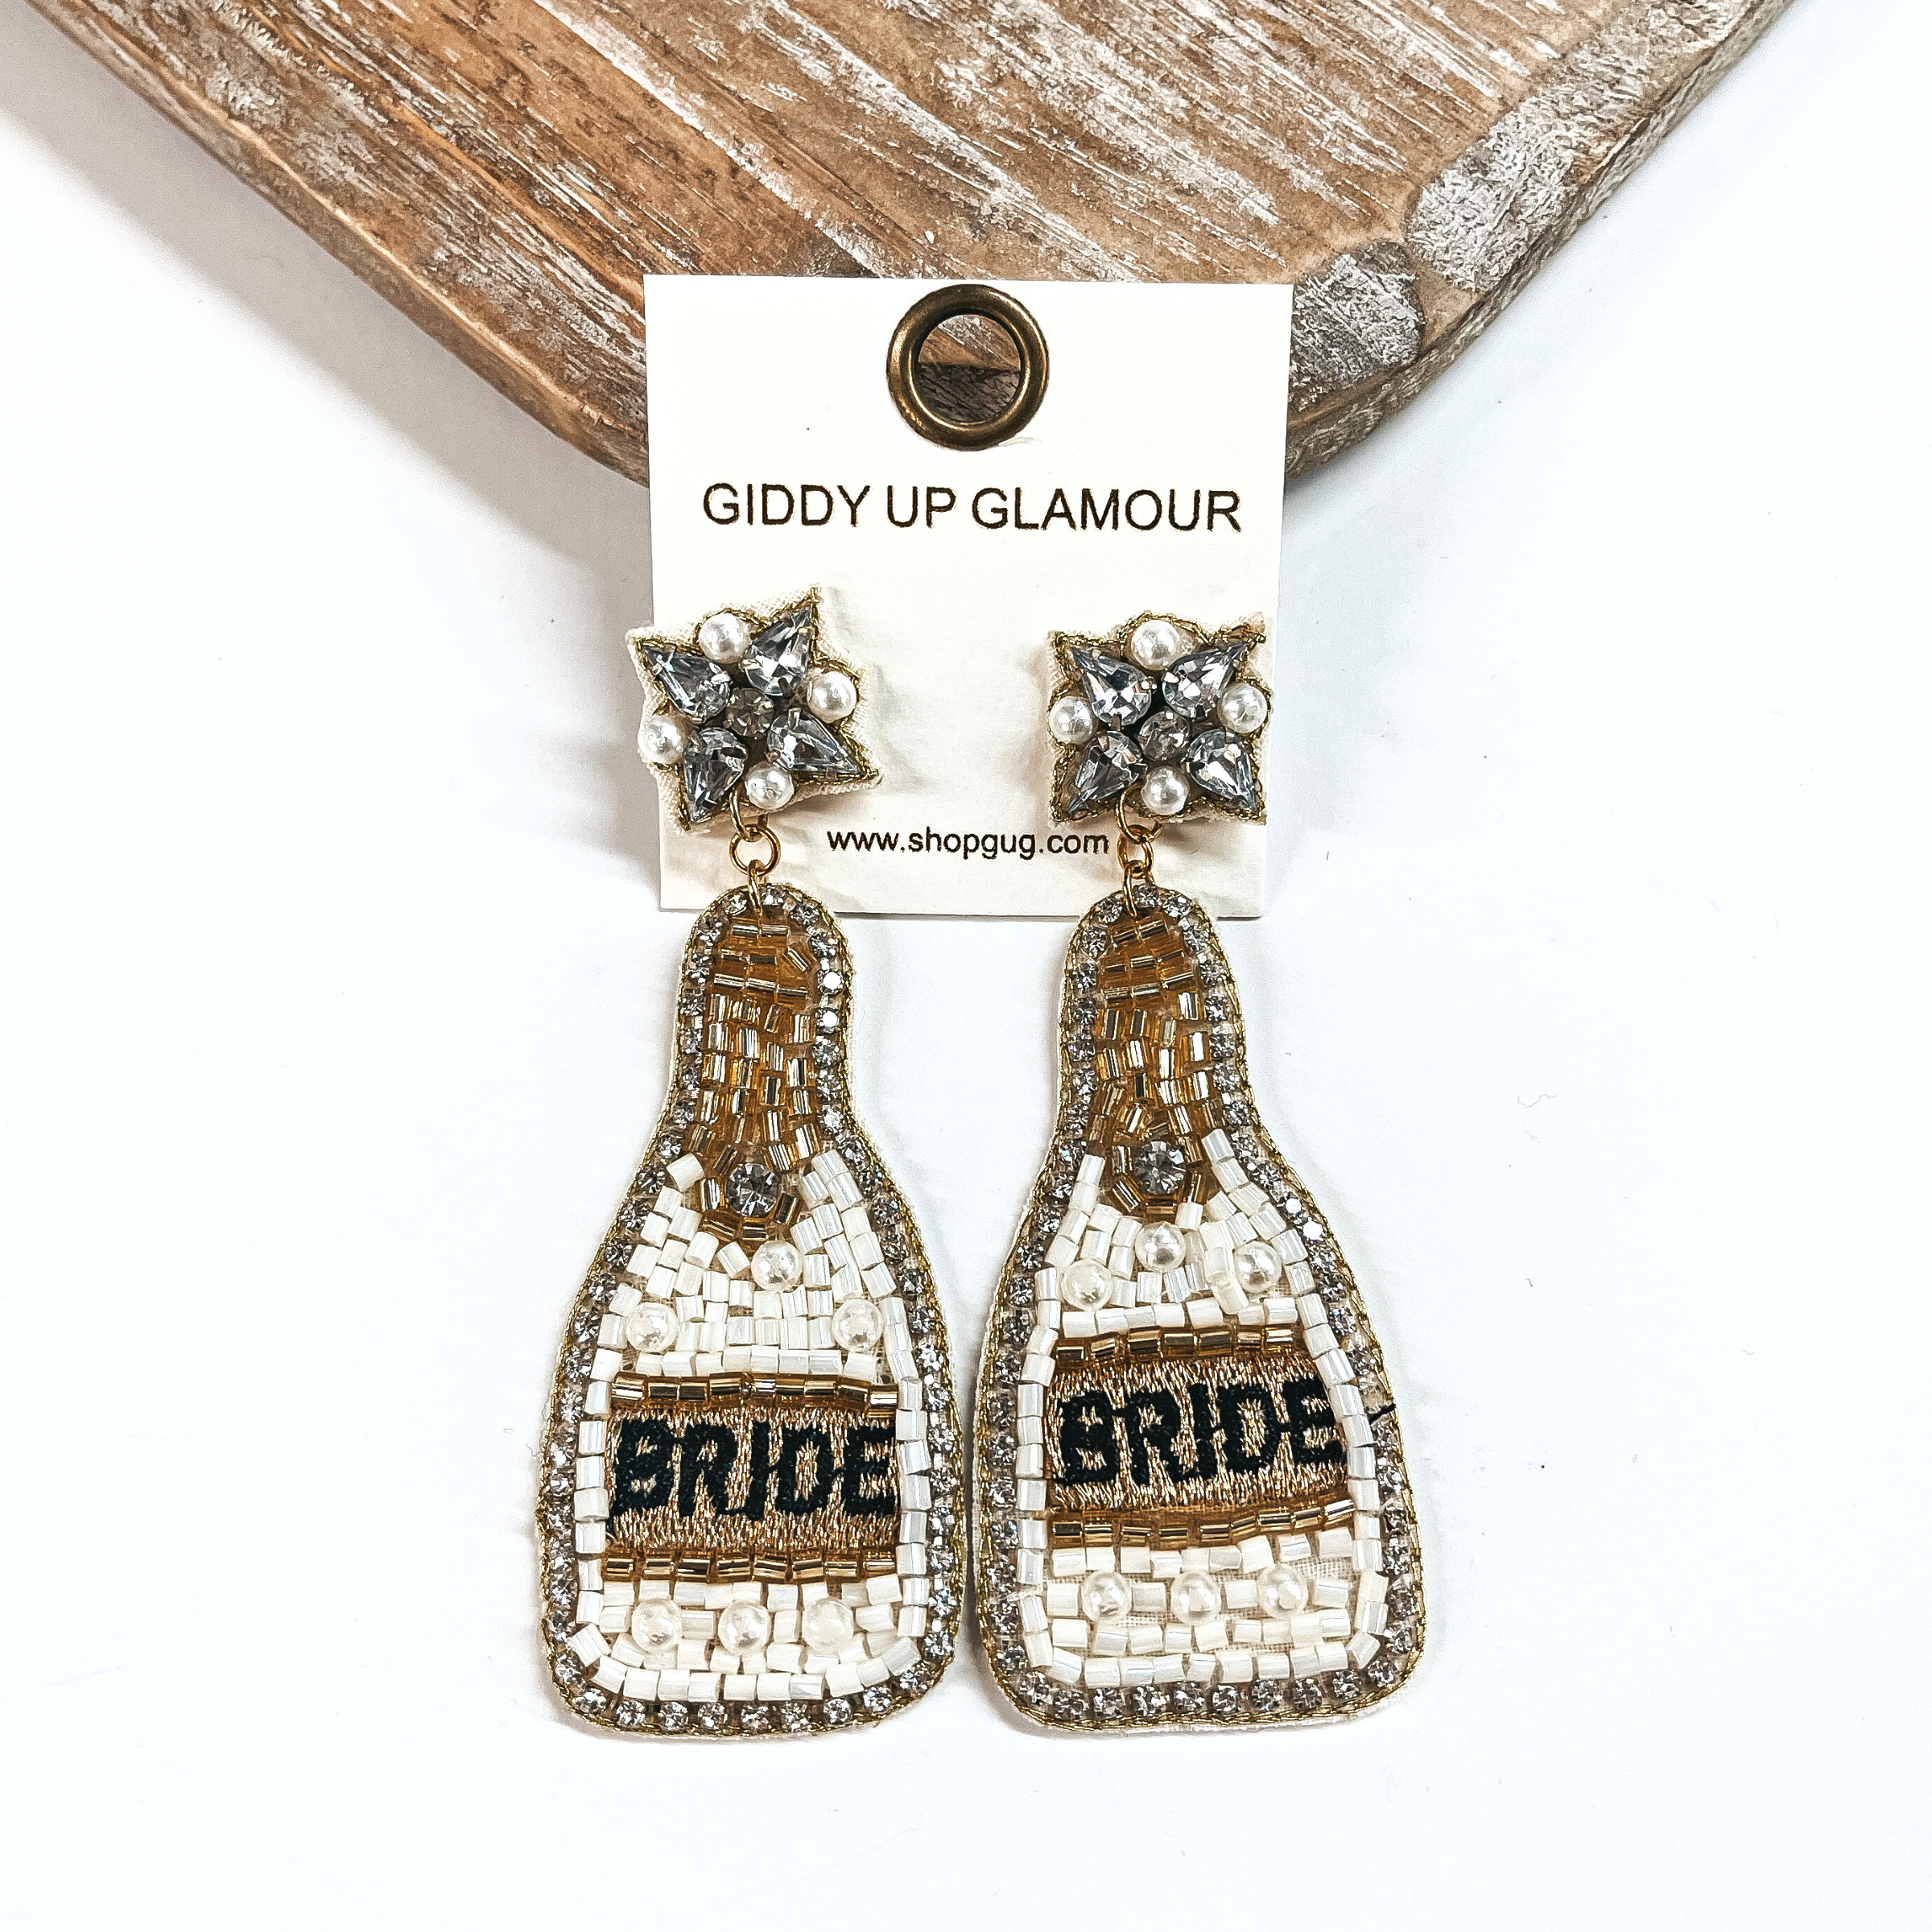 These are beaded bottle earrings in ivory mix with pearls. The postback  has clear crystals and pearls with gold stitching around. The bottle drop has  clear rhinestones all around with ivory, gold, and pearl beads. In the  center it says, Bride, in black and in a gold background. These earrings are  taken on a white background and leaning against a light wood slab.